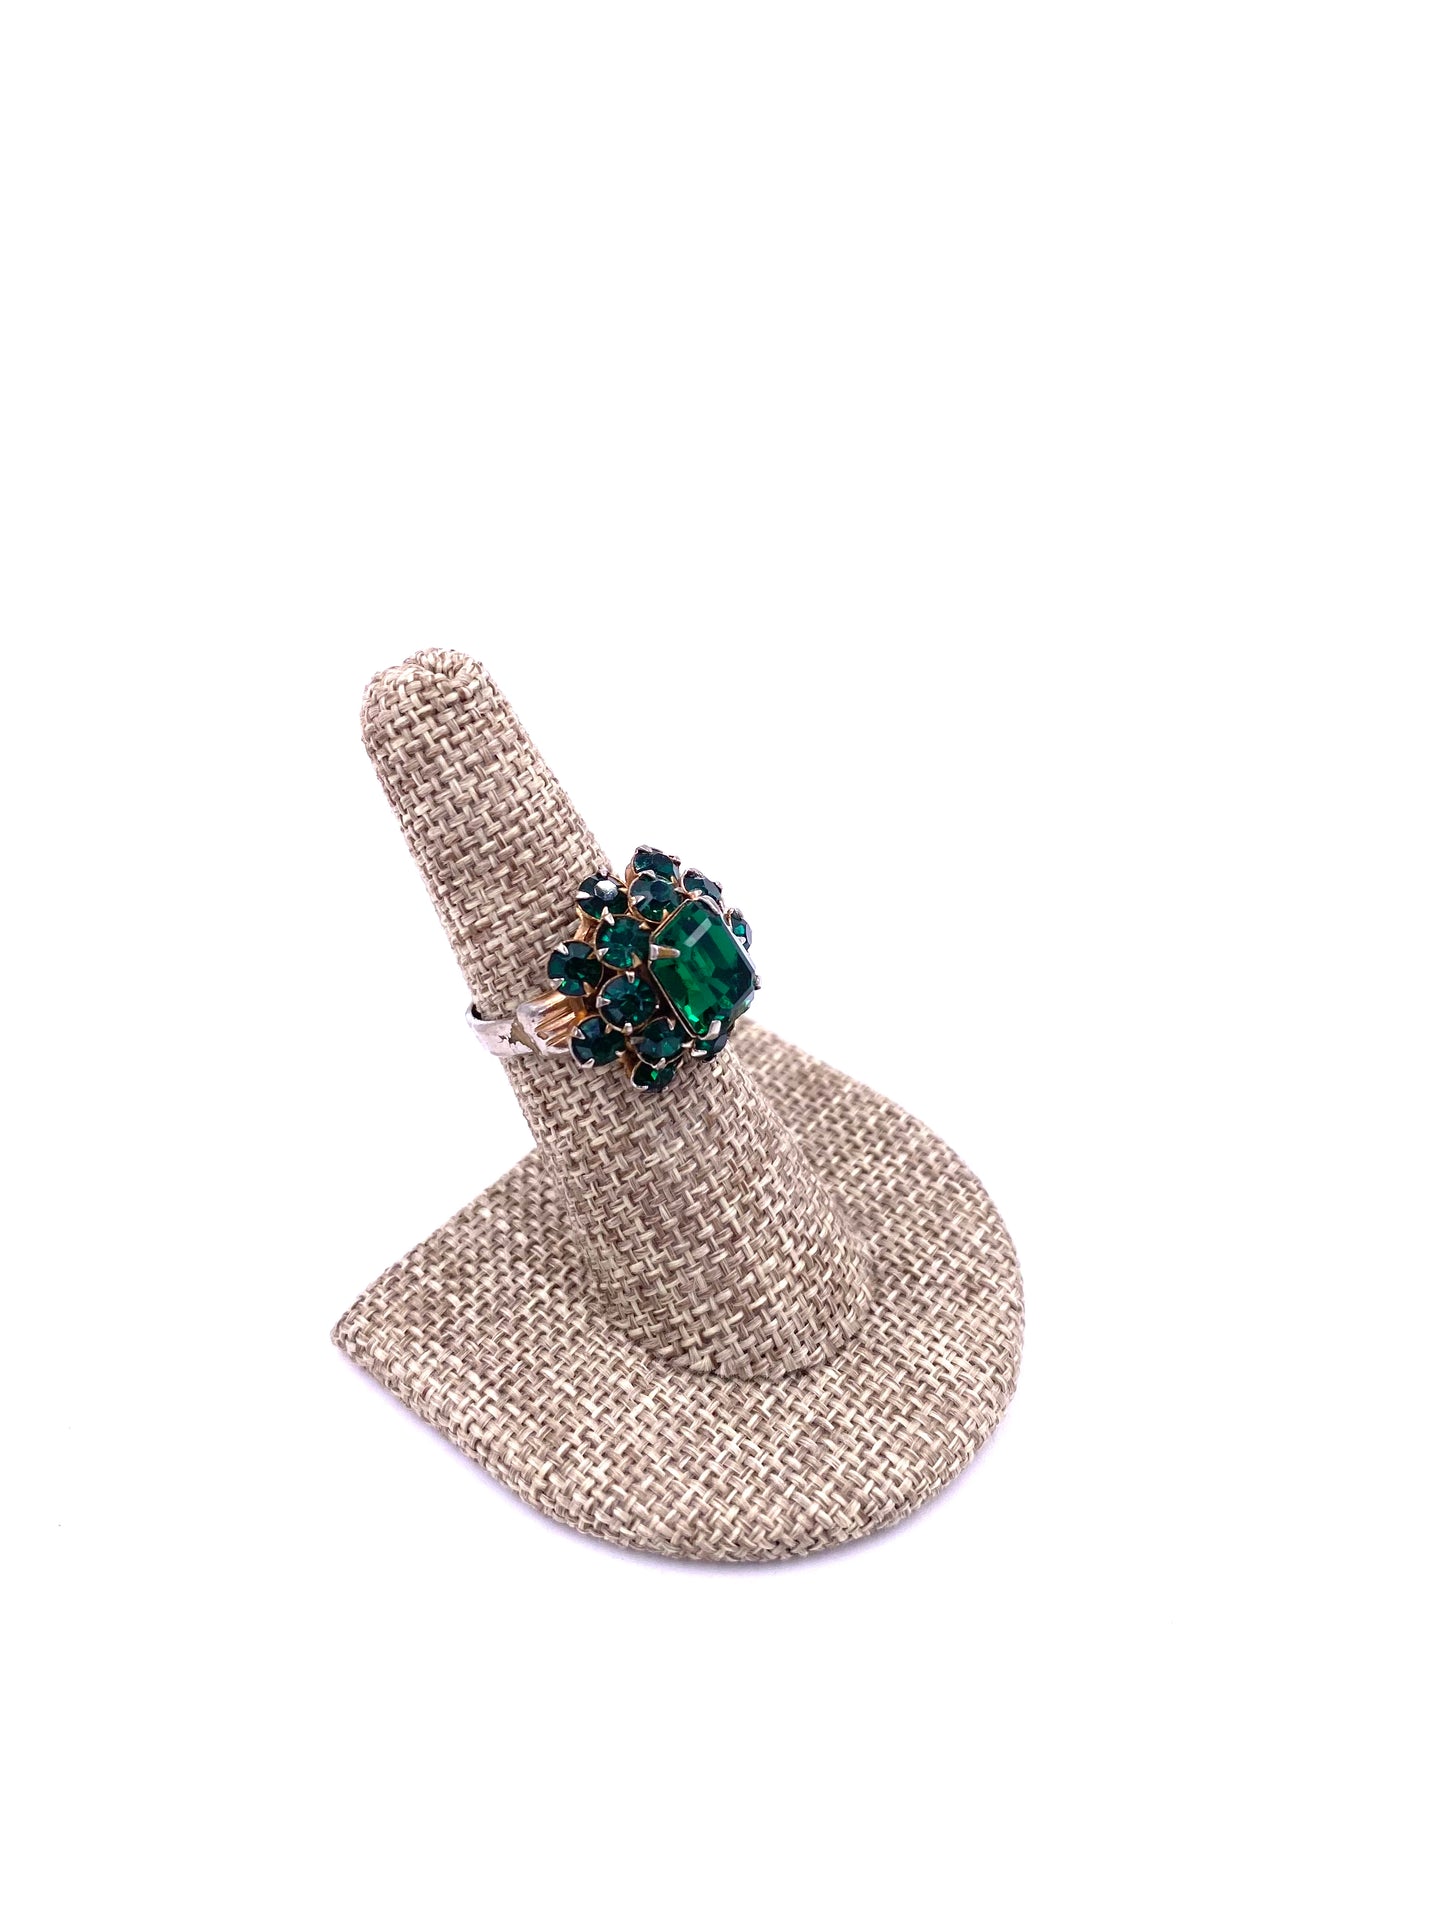 Emerald Cluster dome ring